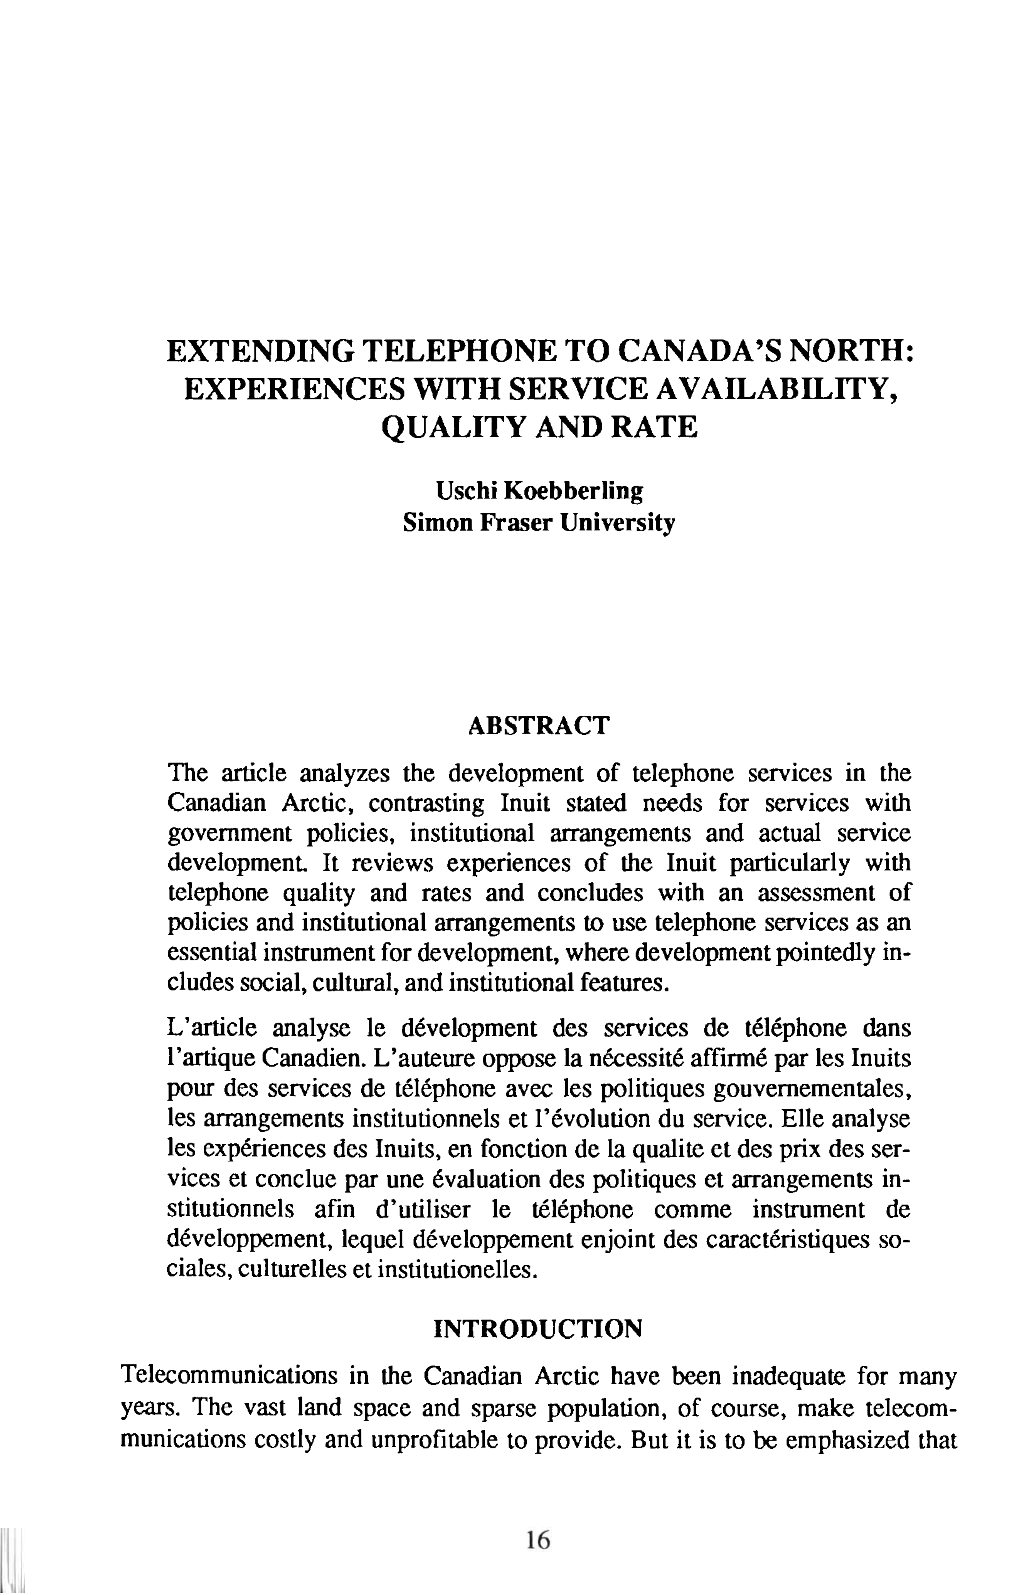 Extending Telephone to Canada's North: Experiences with Service Availability, Quality and Rate